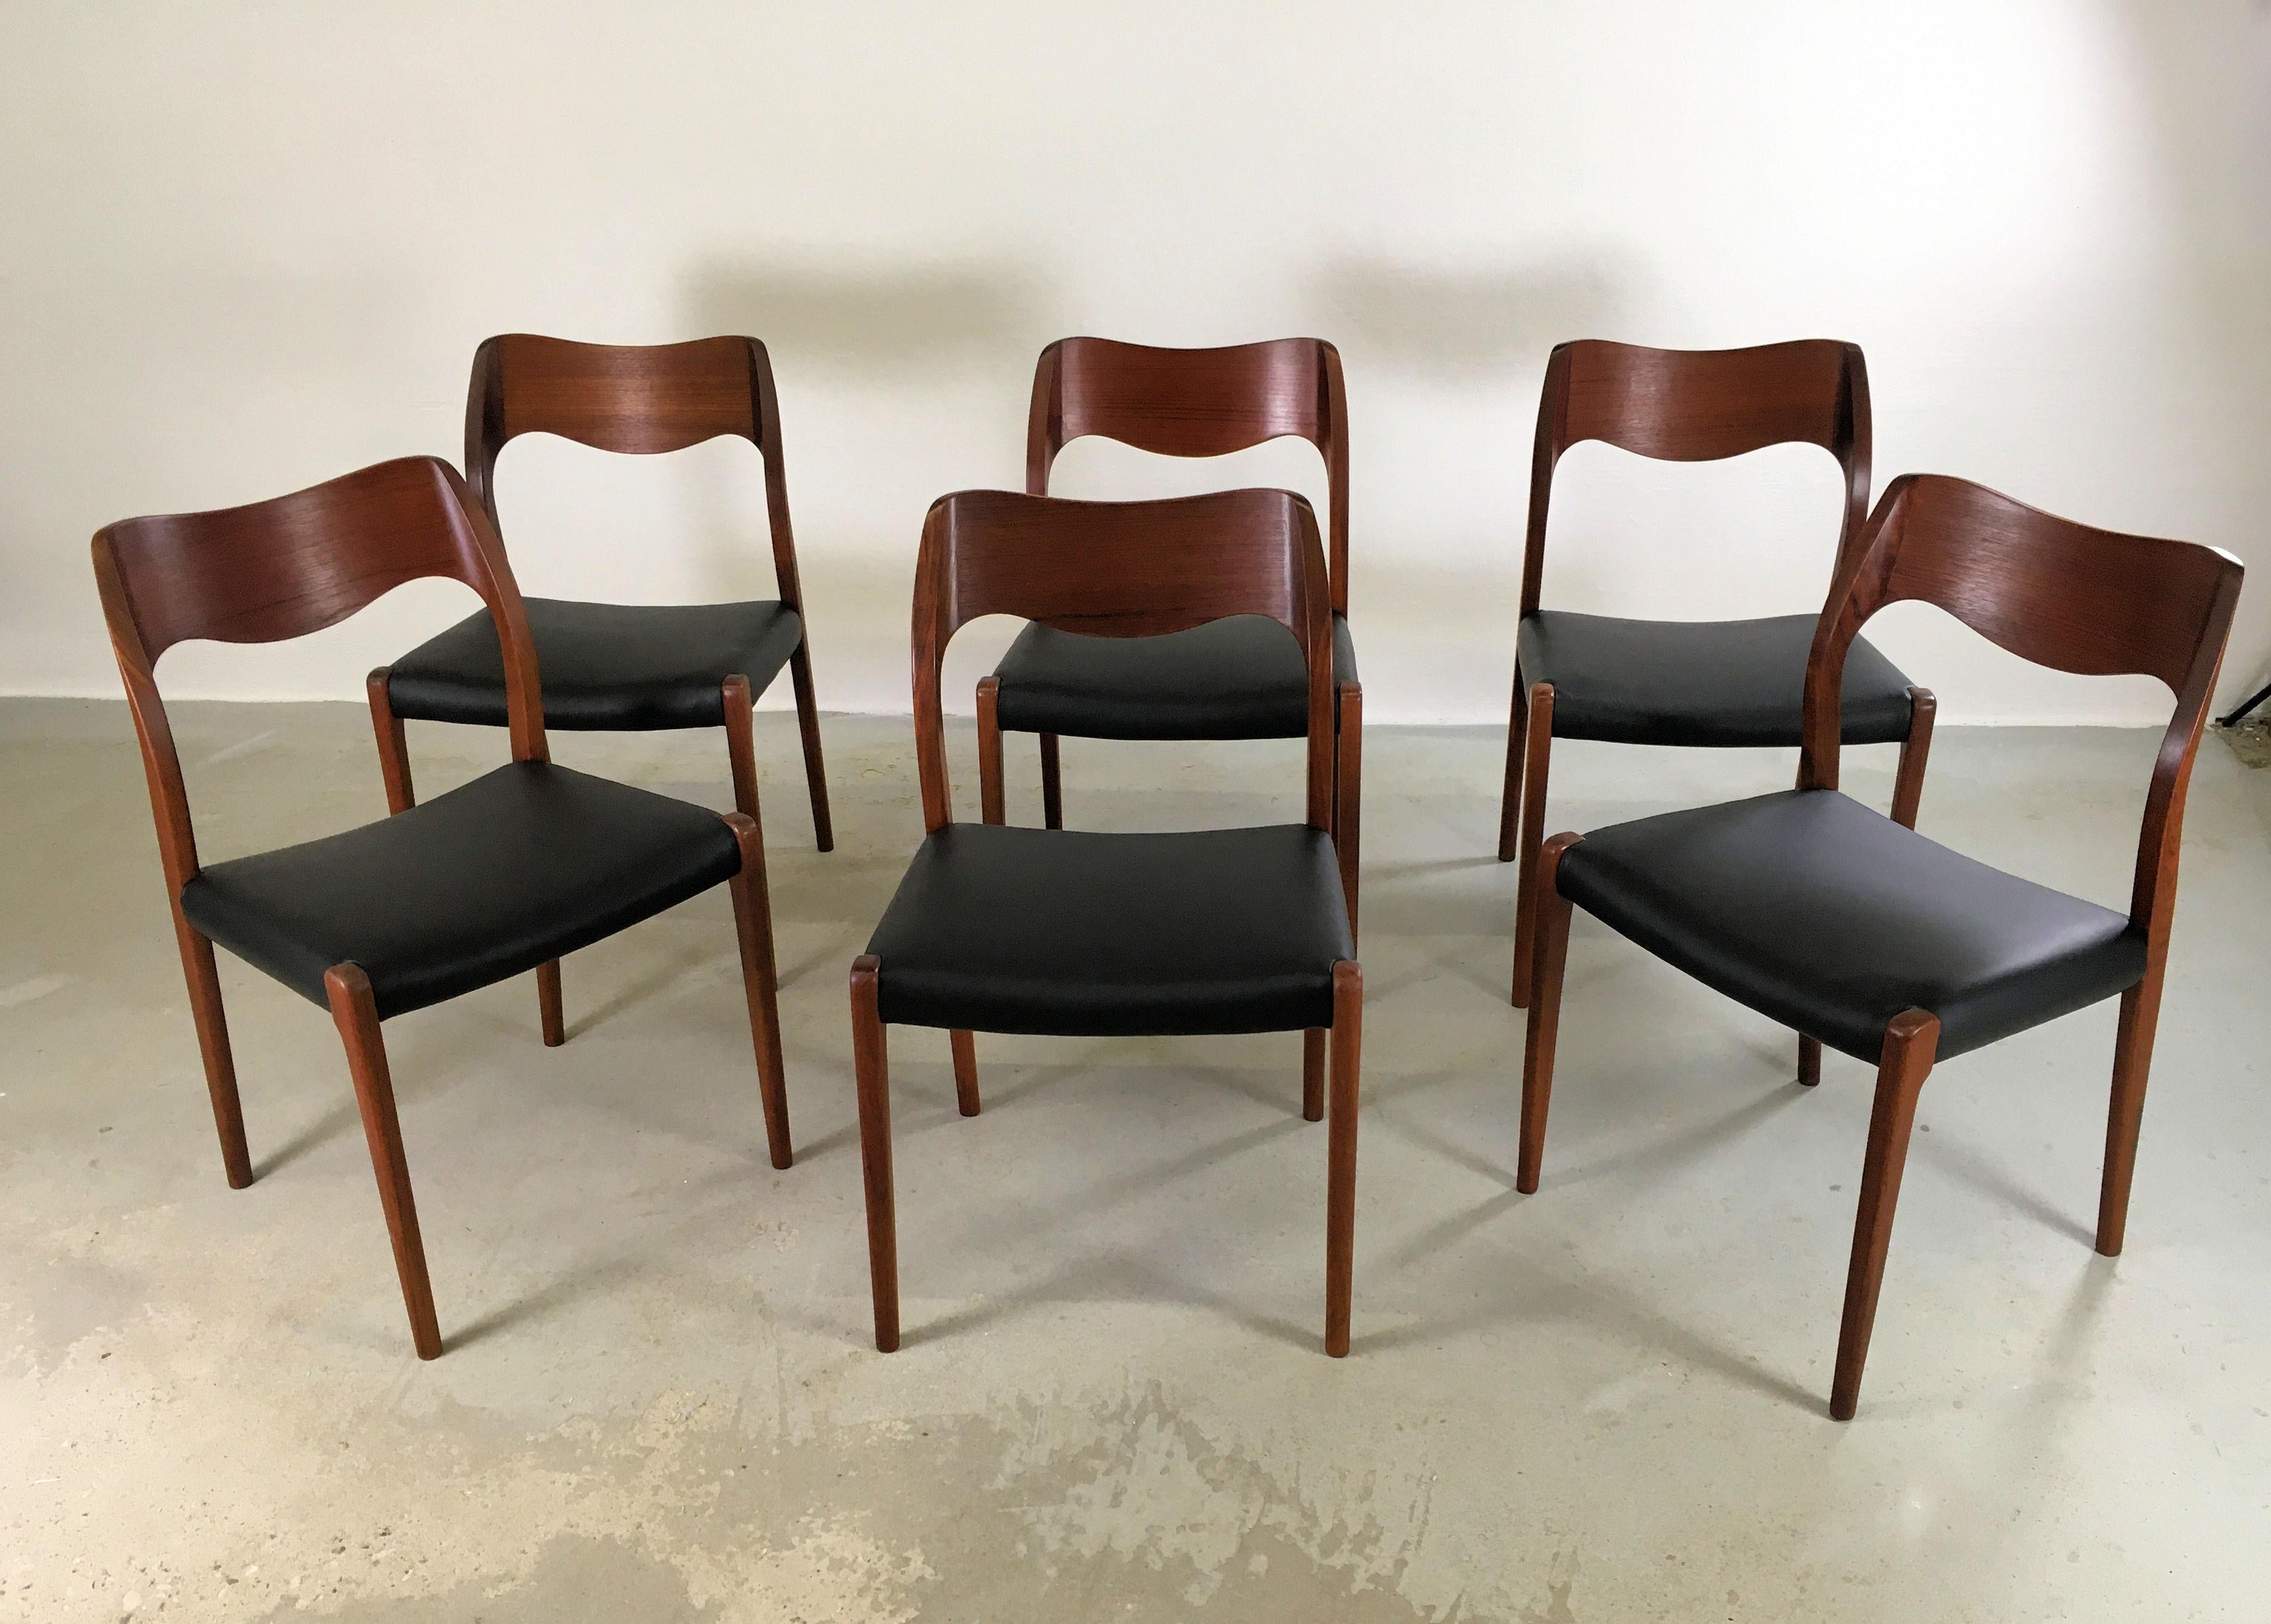 Set of 6 fully restored teak dining chairs designed by Niels Otto Møller in 1951.

The chairs feature a solid frame and backrest in teak designed with straight lined legs and an elegant organic shaped backrest with the soft lines and curves that